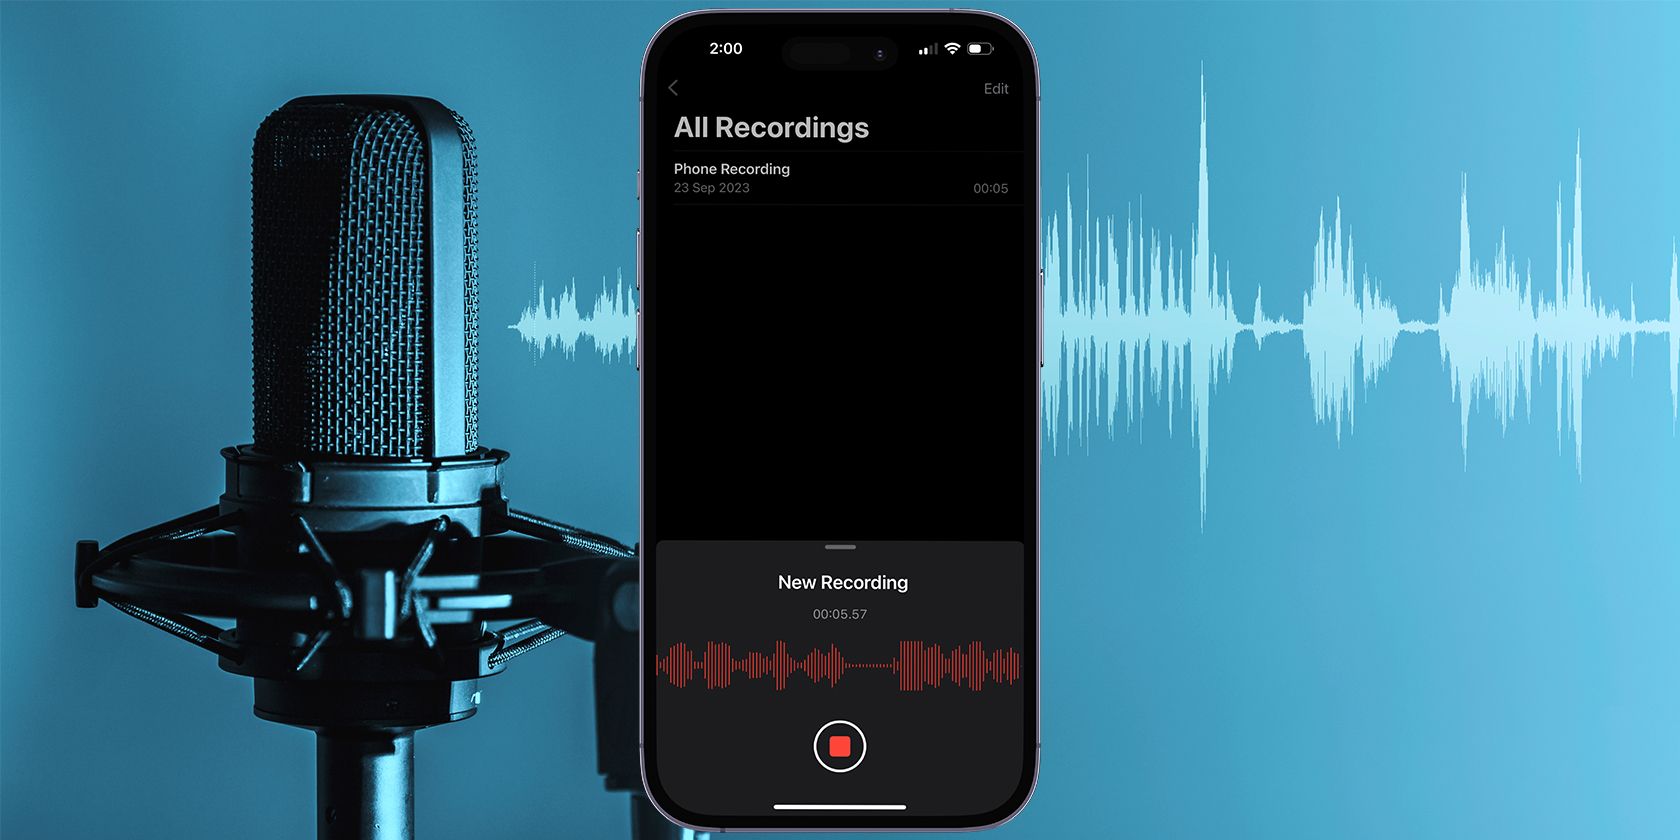 Voice Memos app on an iPhone recording with an studio mic next to it